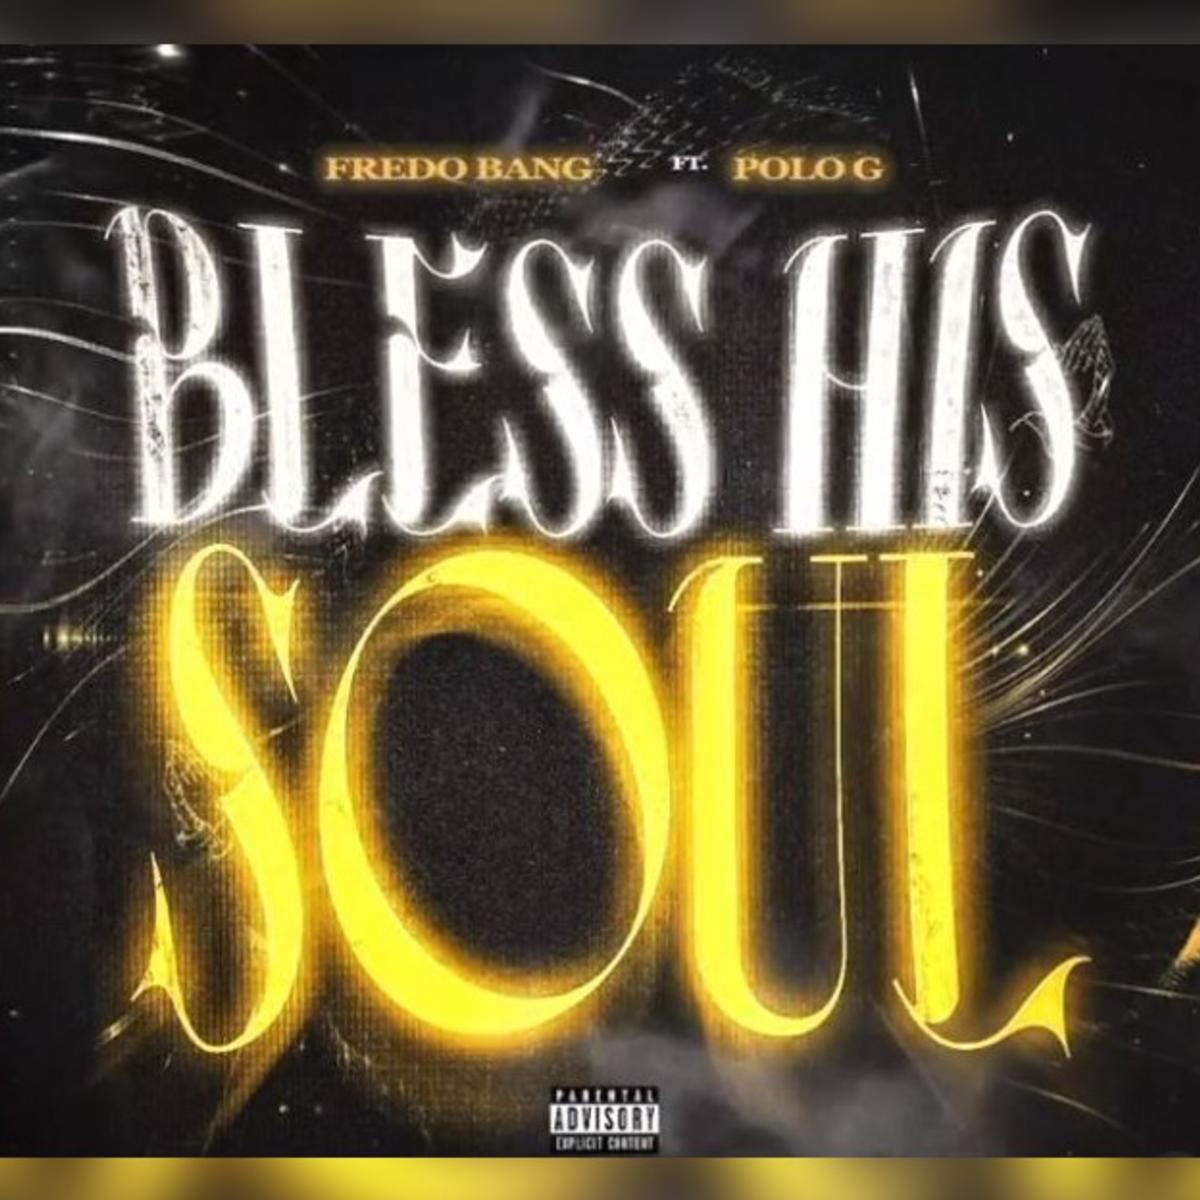 Fredo Bang & Polo G Are On The Same Page In “Bless His Soul”